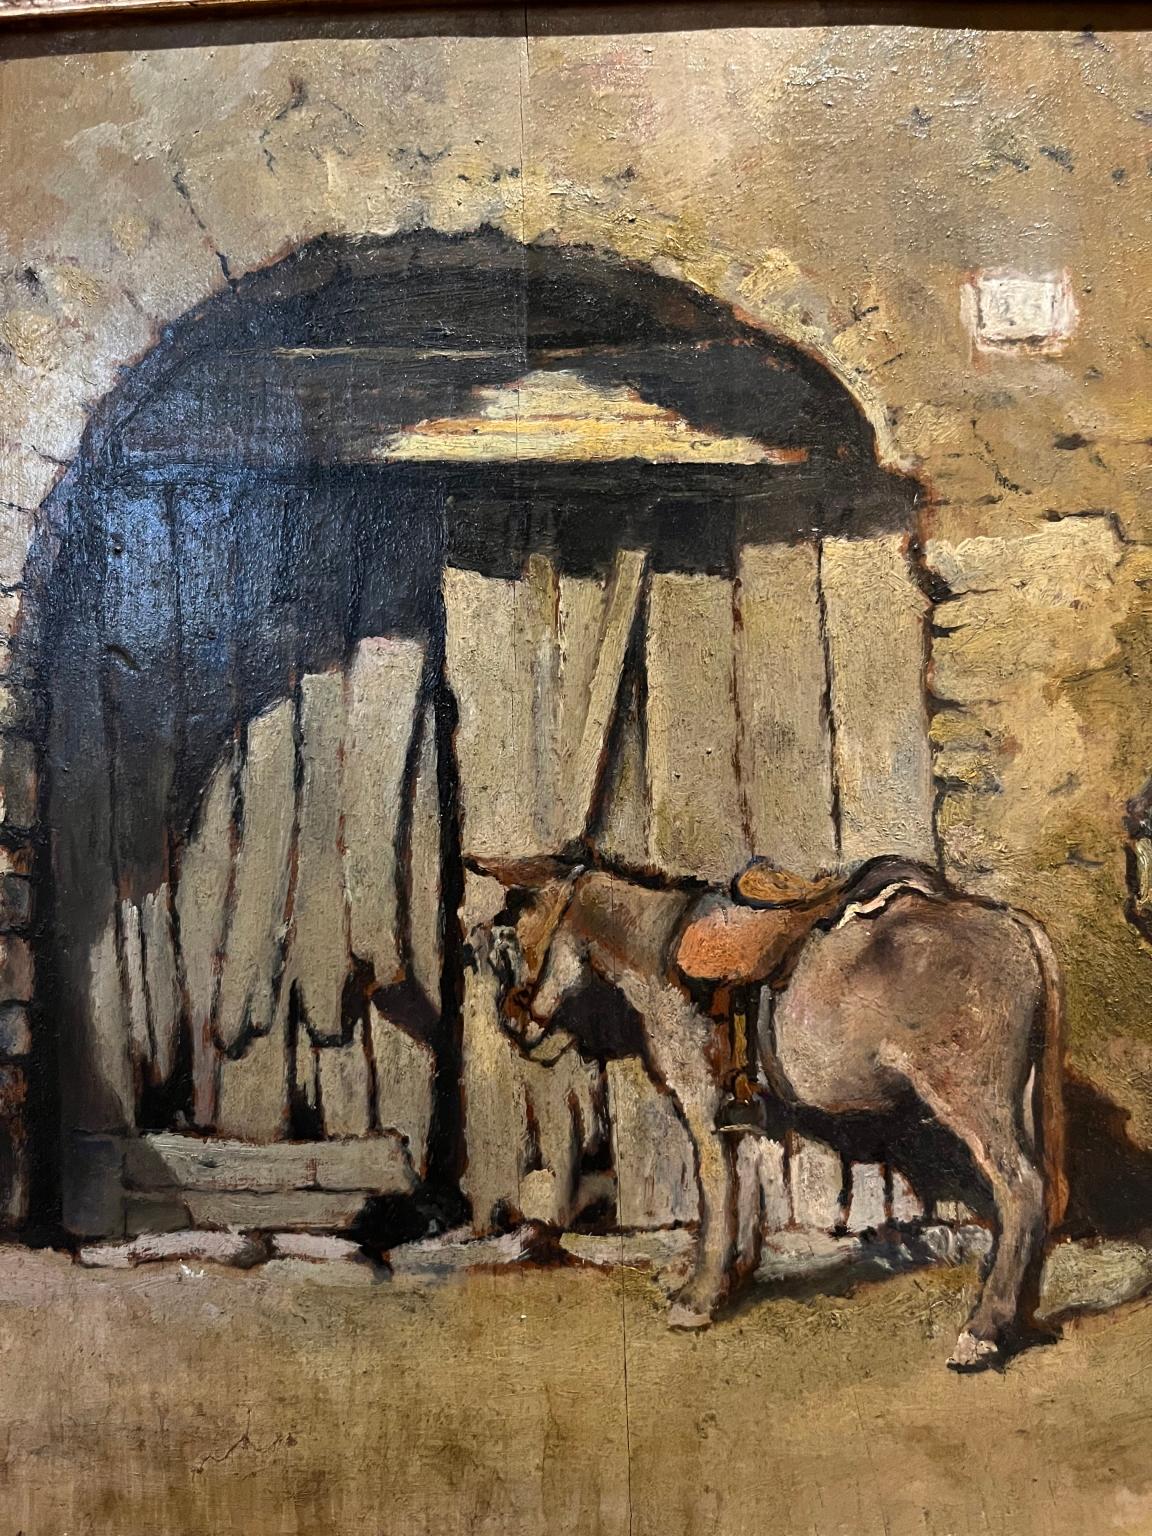 Tuscan Animal Landscape Figurative painting 20th century oil on canvas - Folk Art Painting by Unknown